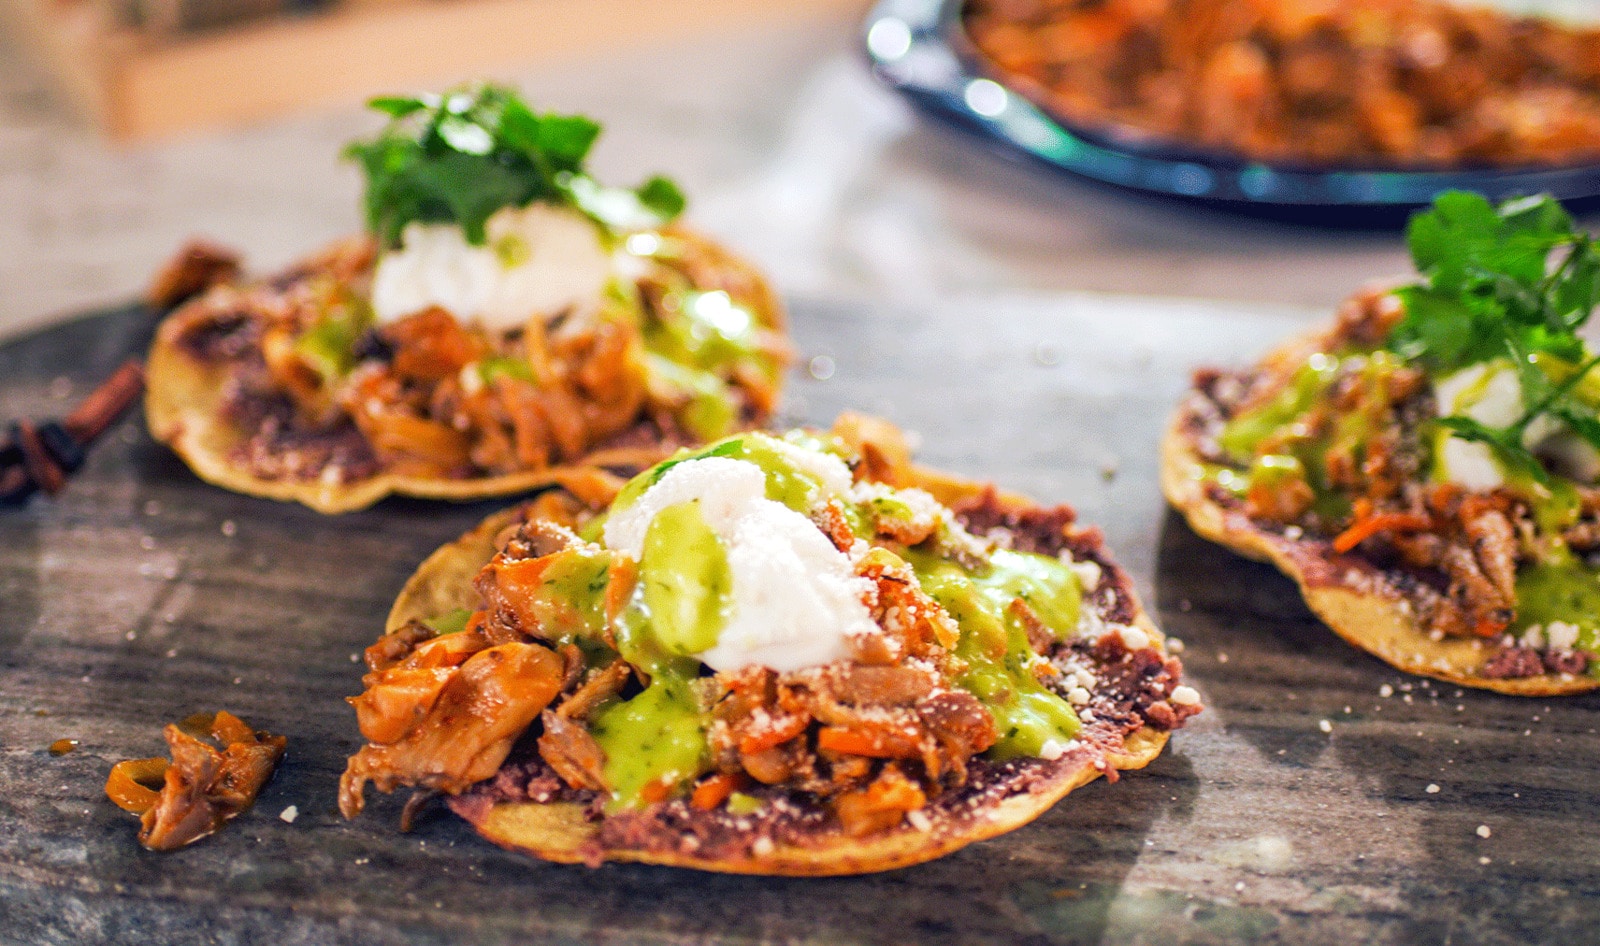 Spice Brand McCormick Names Vegan Mexican Food Top Trend of the Year